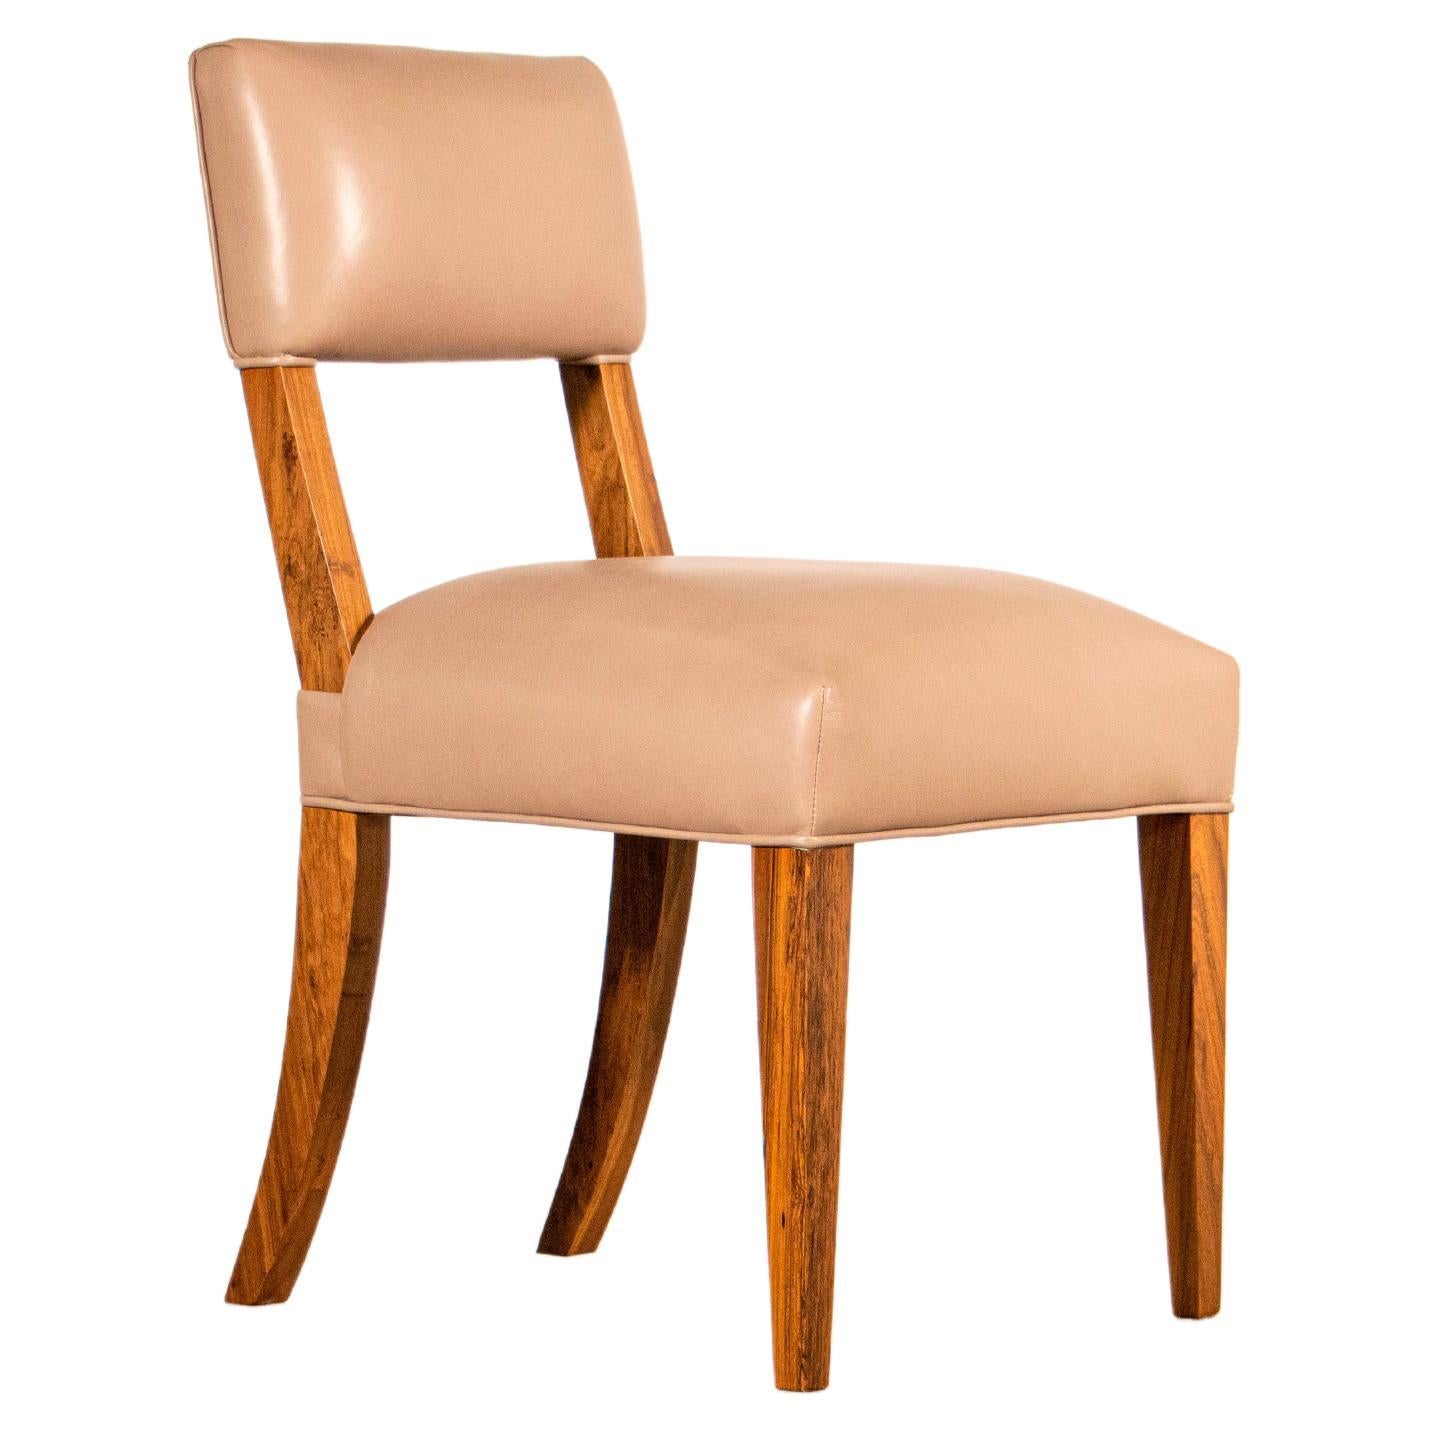 Transitional Wood Dining Chair in Leather or COM/COL from Costantini, Neto For Sale